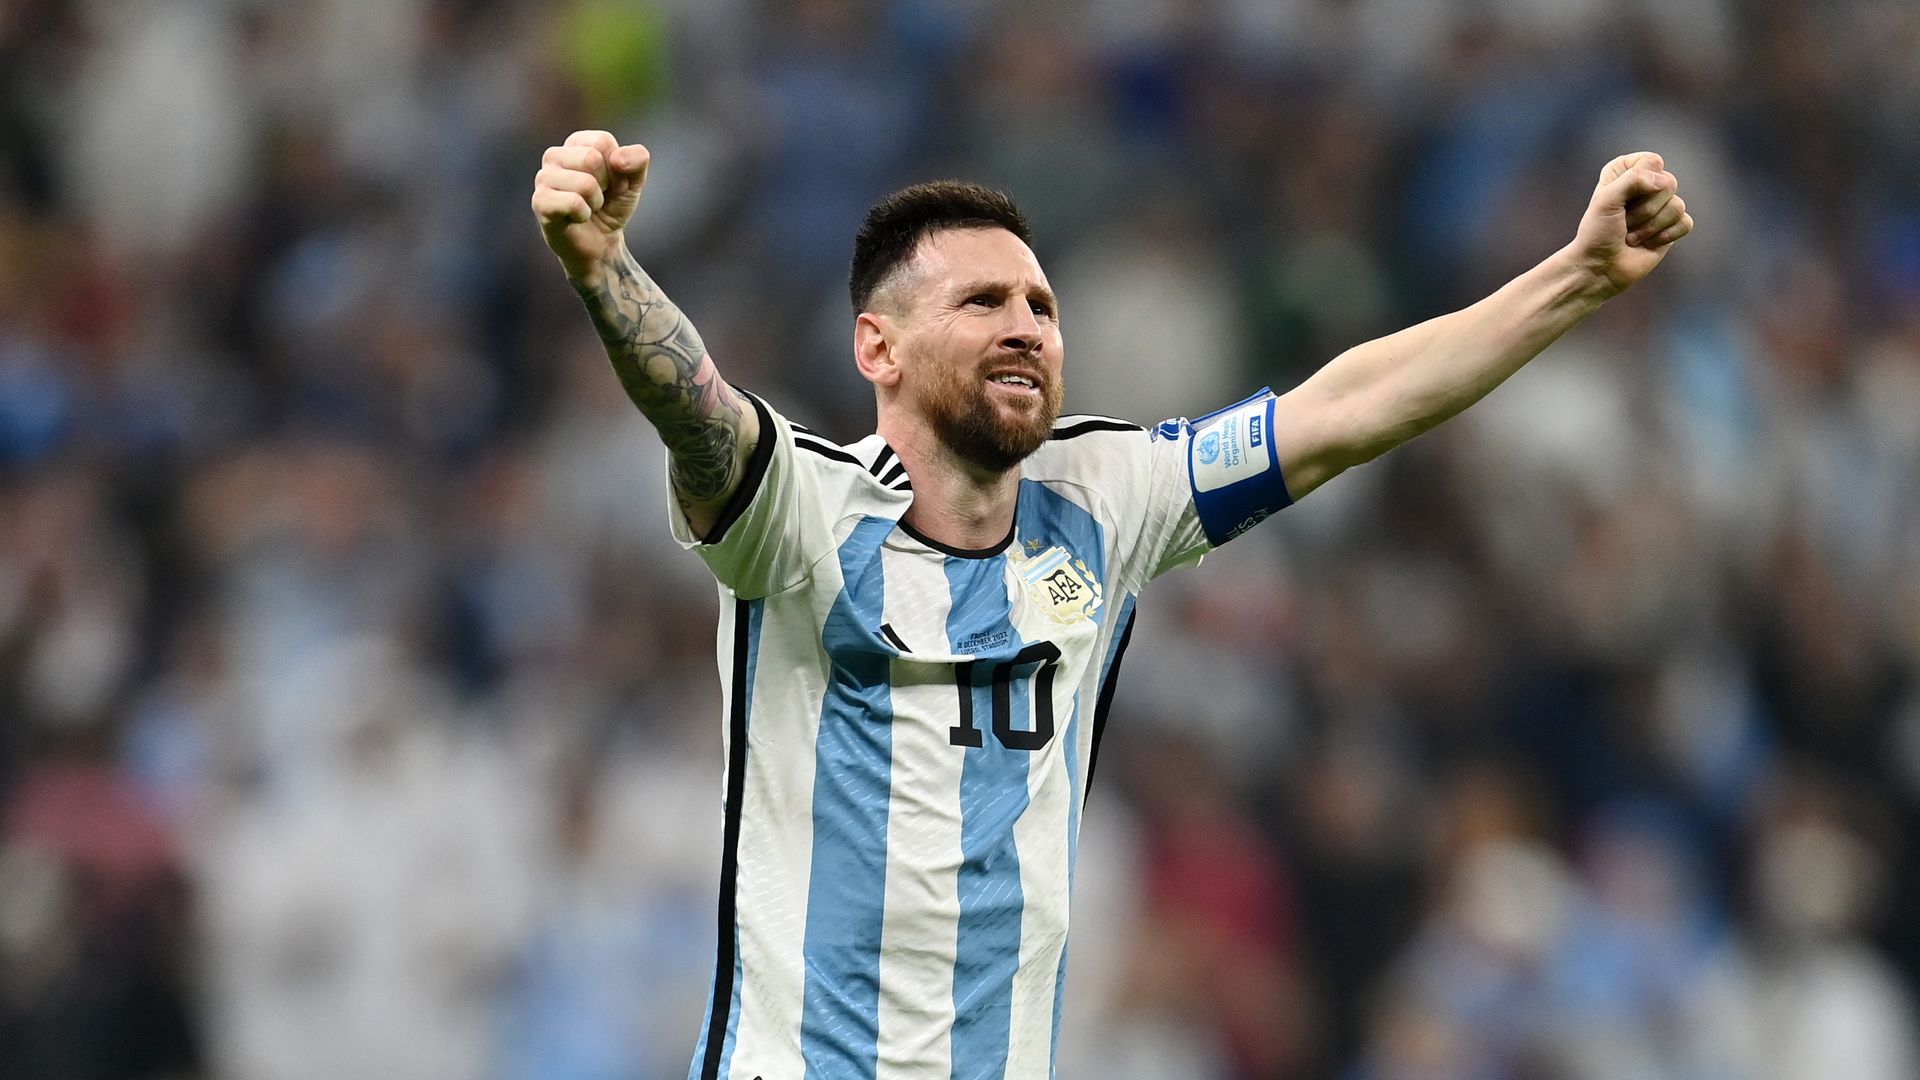 Lionel Messi of Argentina celebrates after scoring the team's third goal during the FIFA World Cup Qatar 2022.